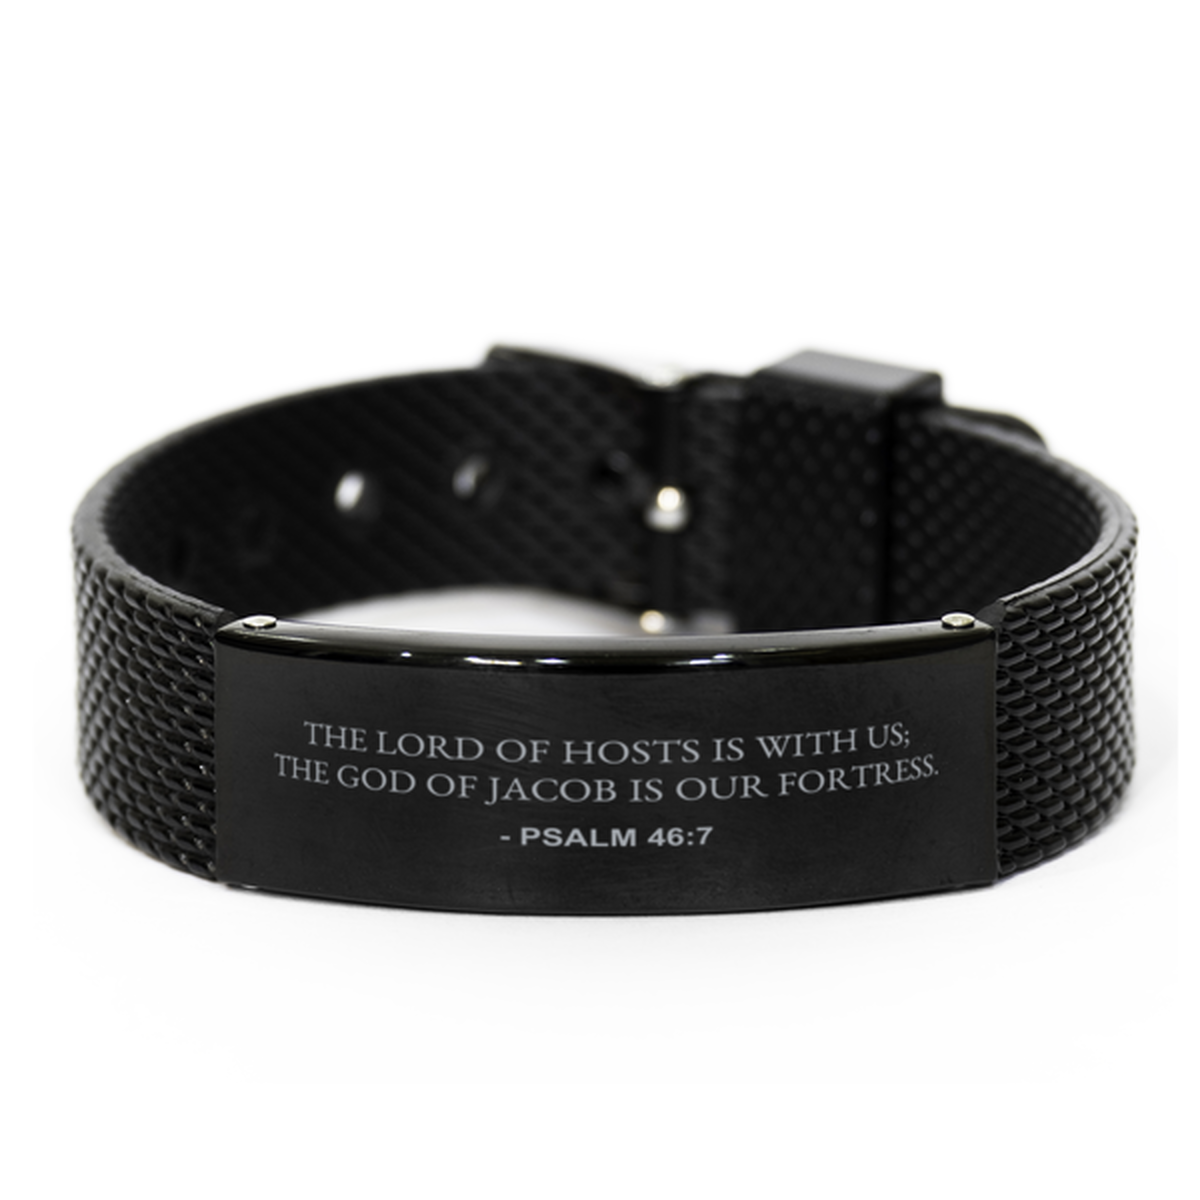 Christian Black Bracelet,, Psalm 46:7 The Lord Of Hosts Is With Us; The God Of Jacob Is, Motivational Bible Verse Gifts For Men Women